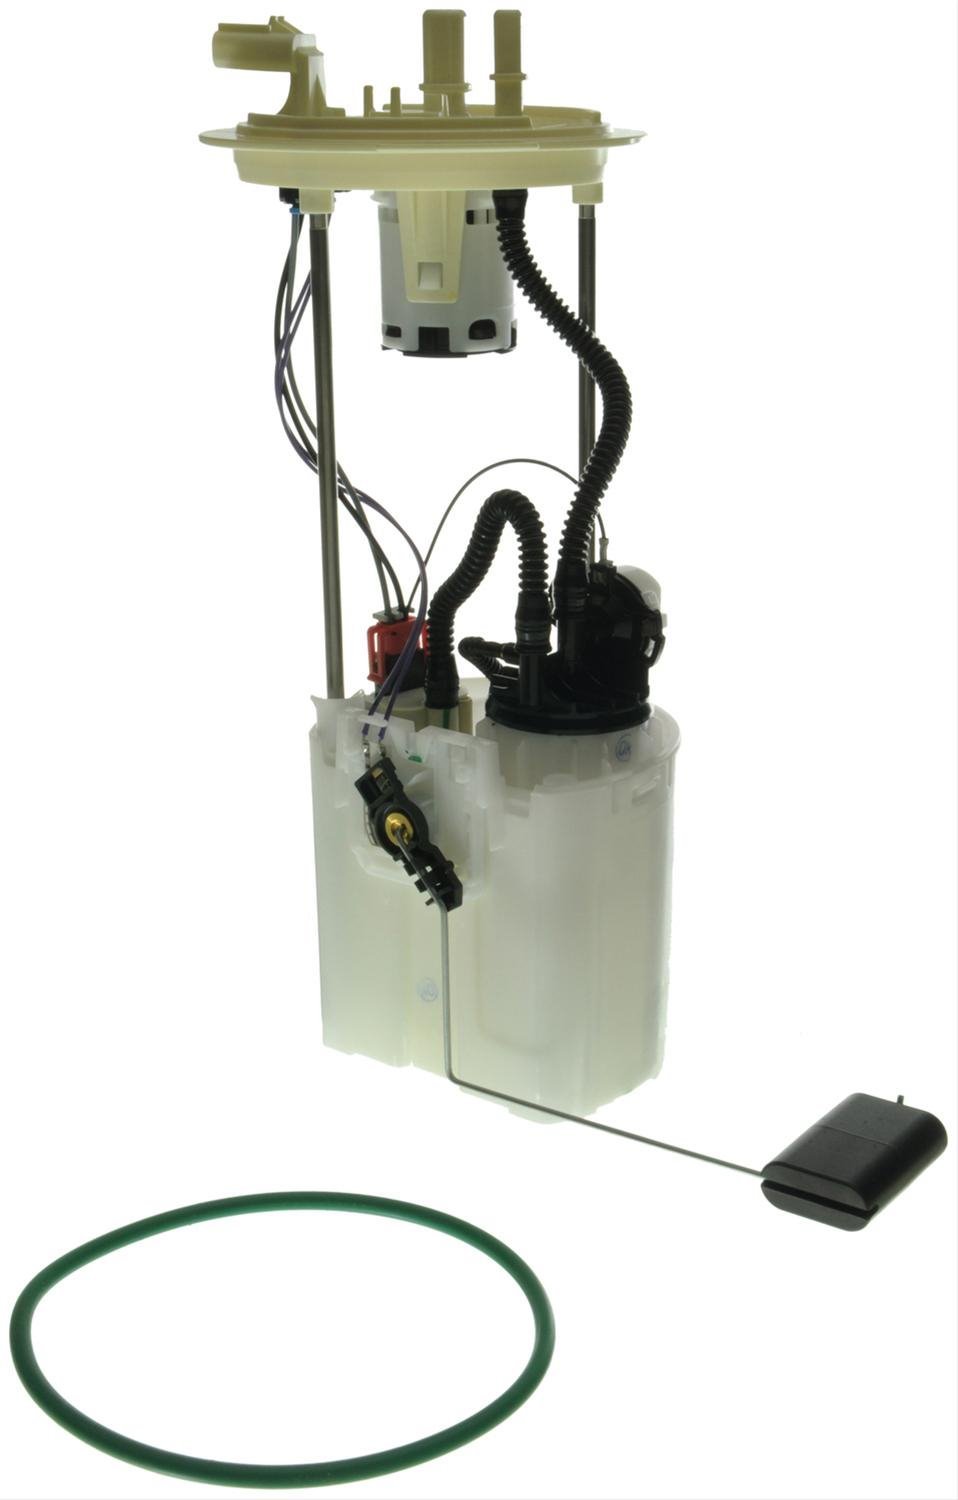 OE Ford Replacement Fuel Pump Module Assembly for 2009-2014 Ford F-150